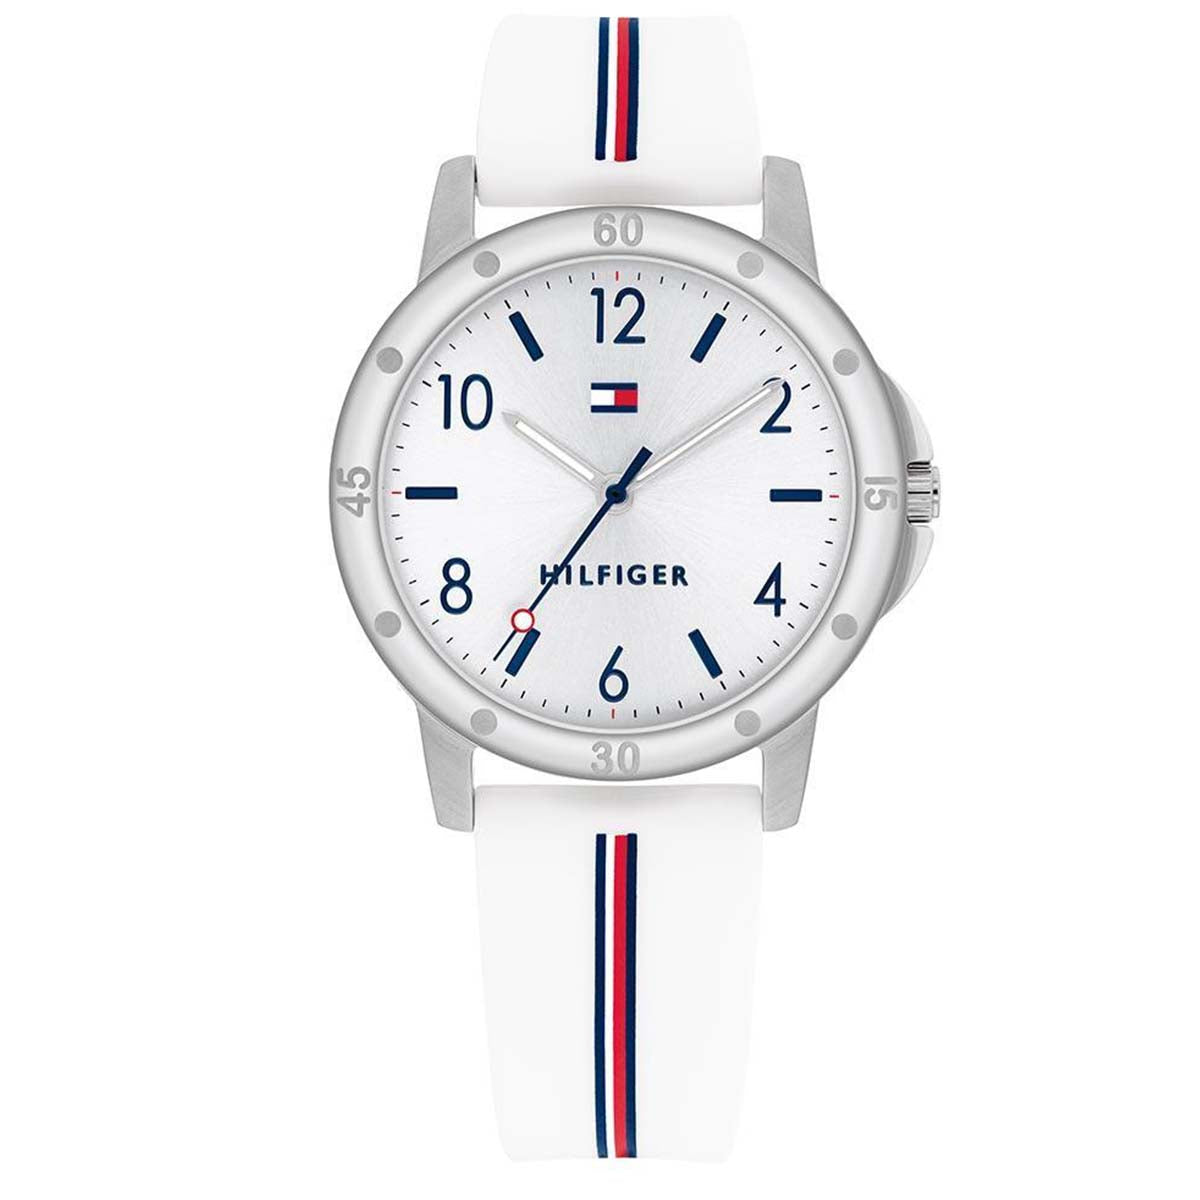 Tommy Hilfiger - Youth - 172.0014